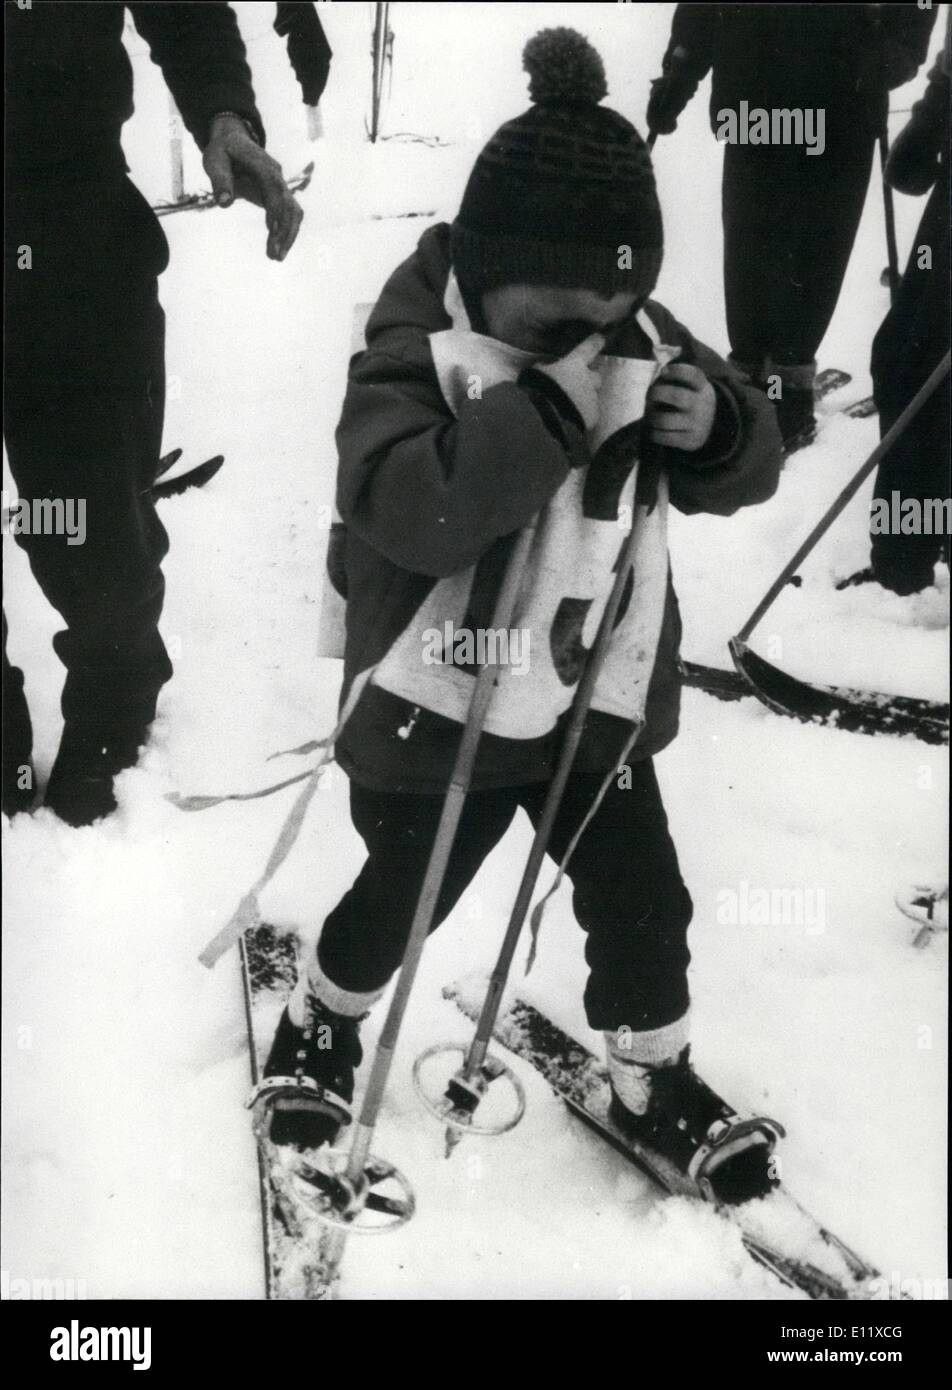 Historical Archive Skier High Resolution Stock Photography and Images -  Alamy